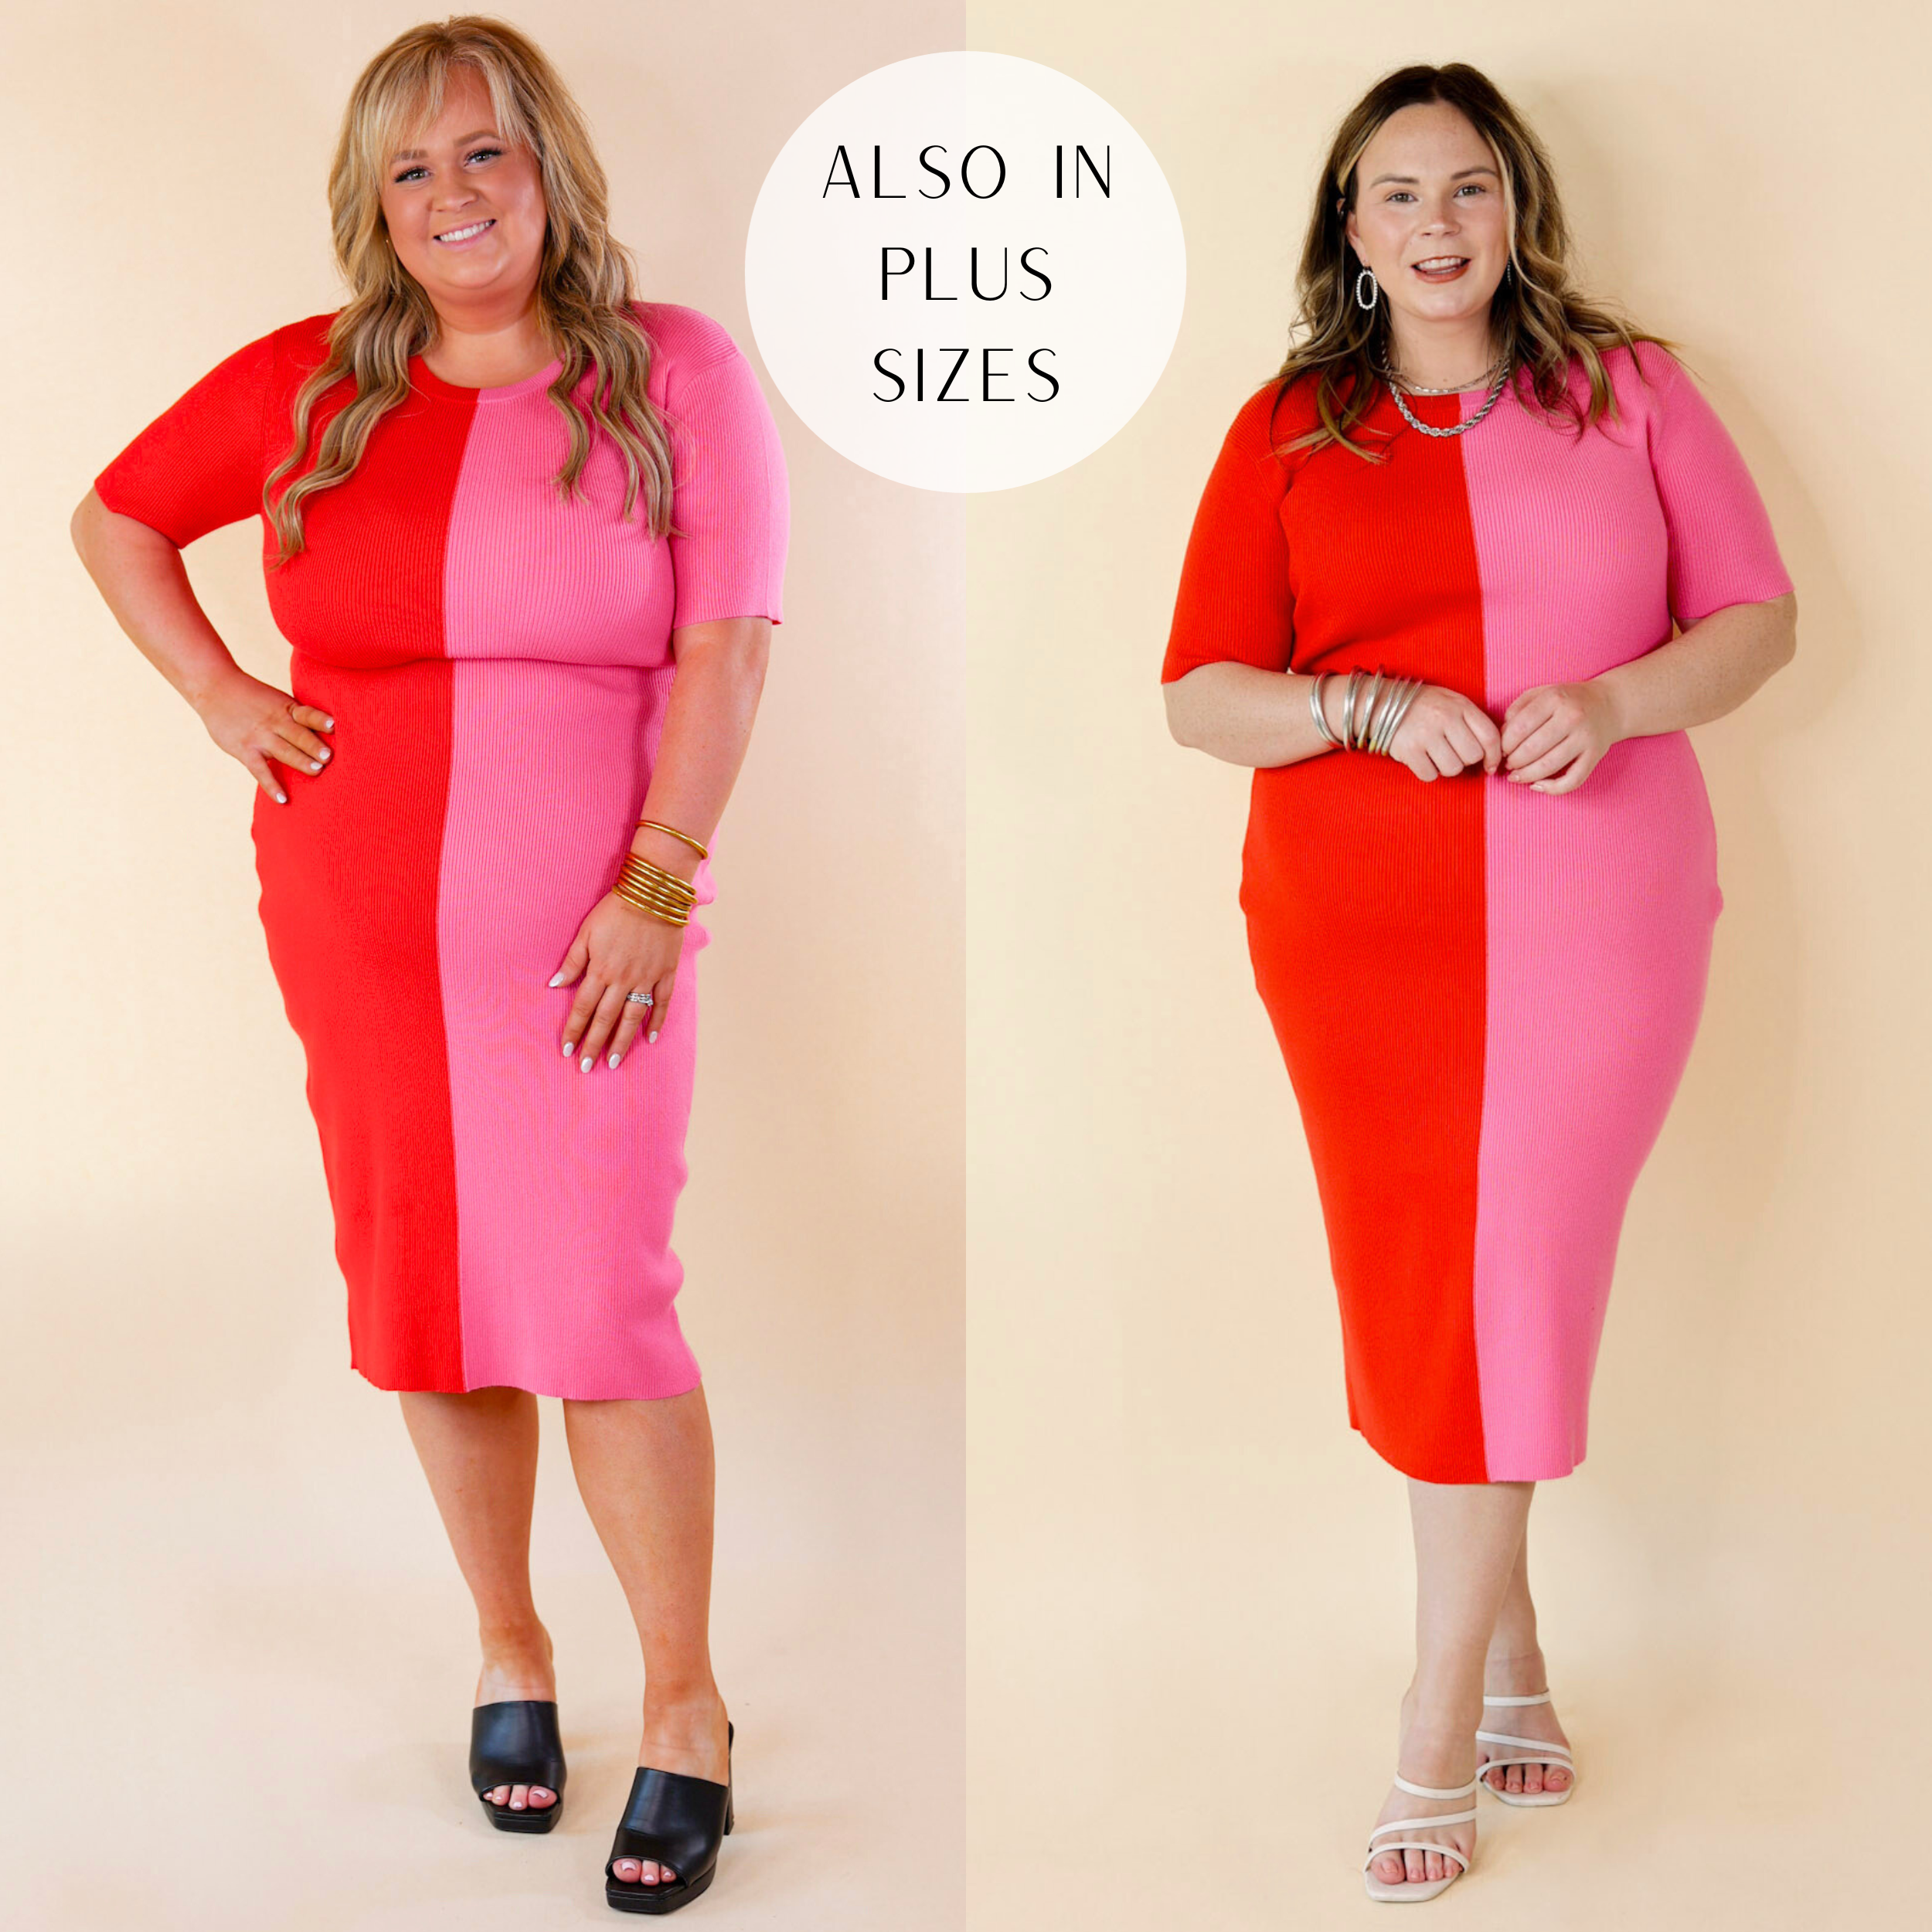 Model is wearing a half red half pink midi dress with short sleeves. Model has it paired with gold jewelry and white booties. Plus size model has the dress paired with black heels and gold jewelry.